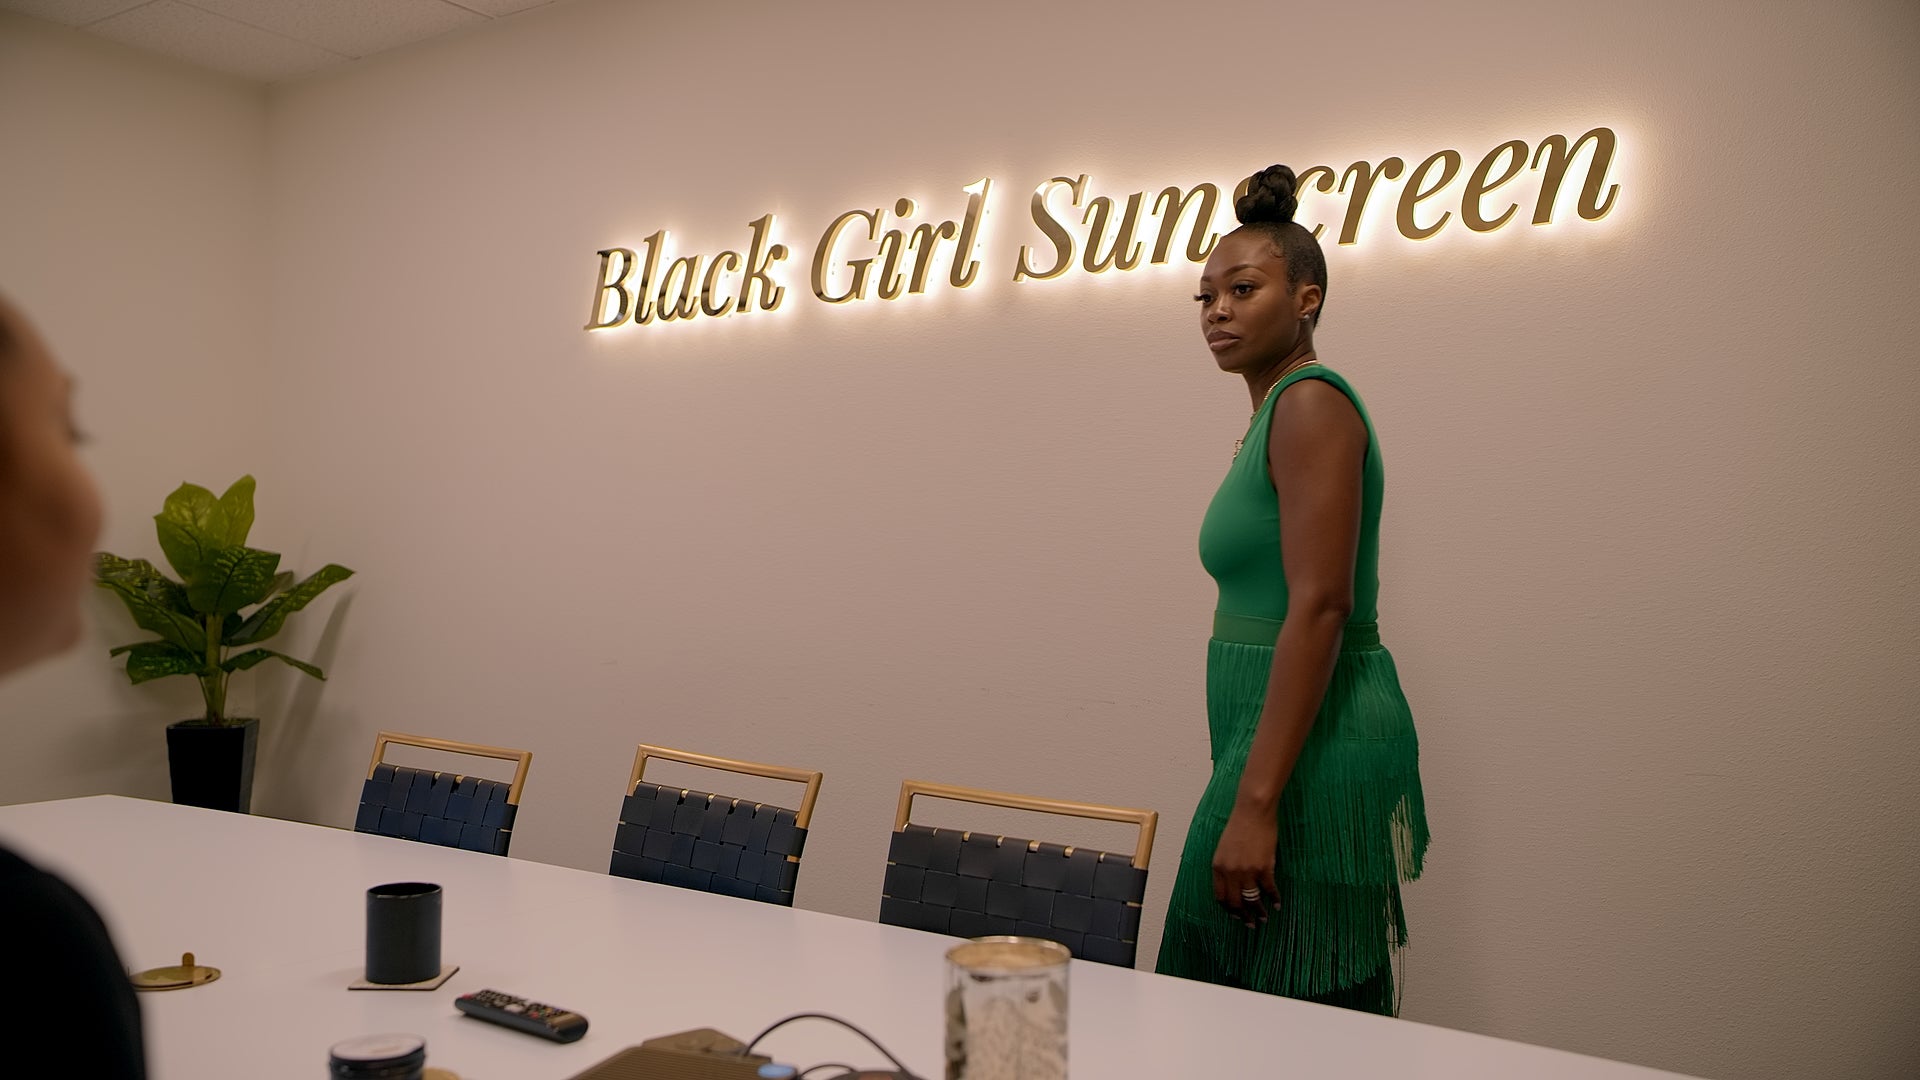 Meet Shontay Lundy, Founder of Black Girl Sunscreen